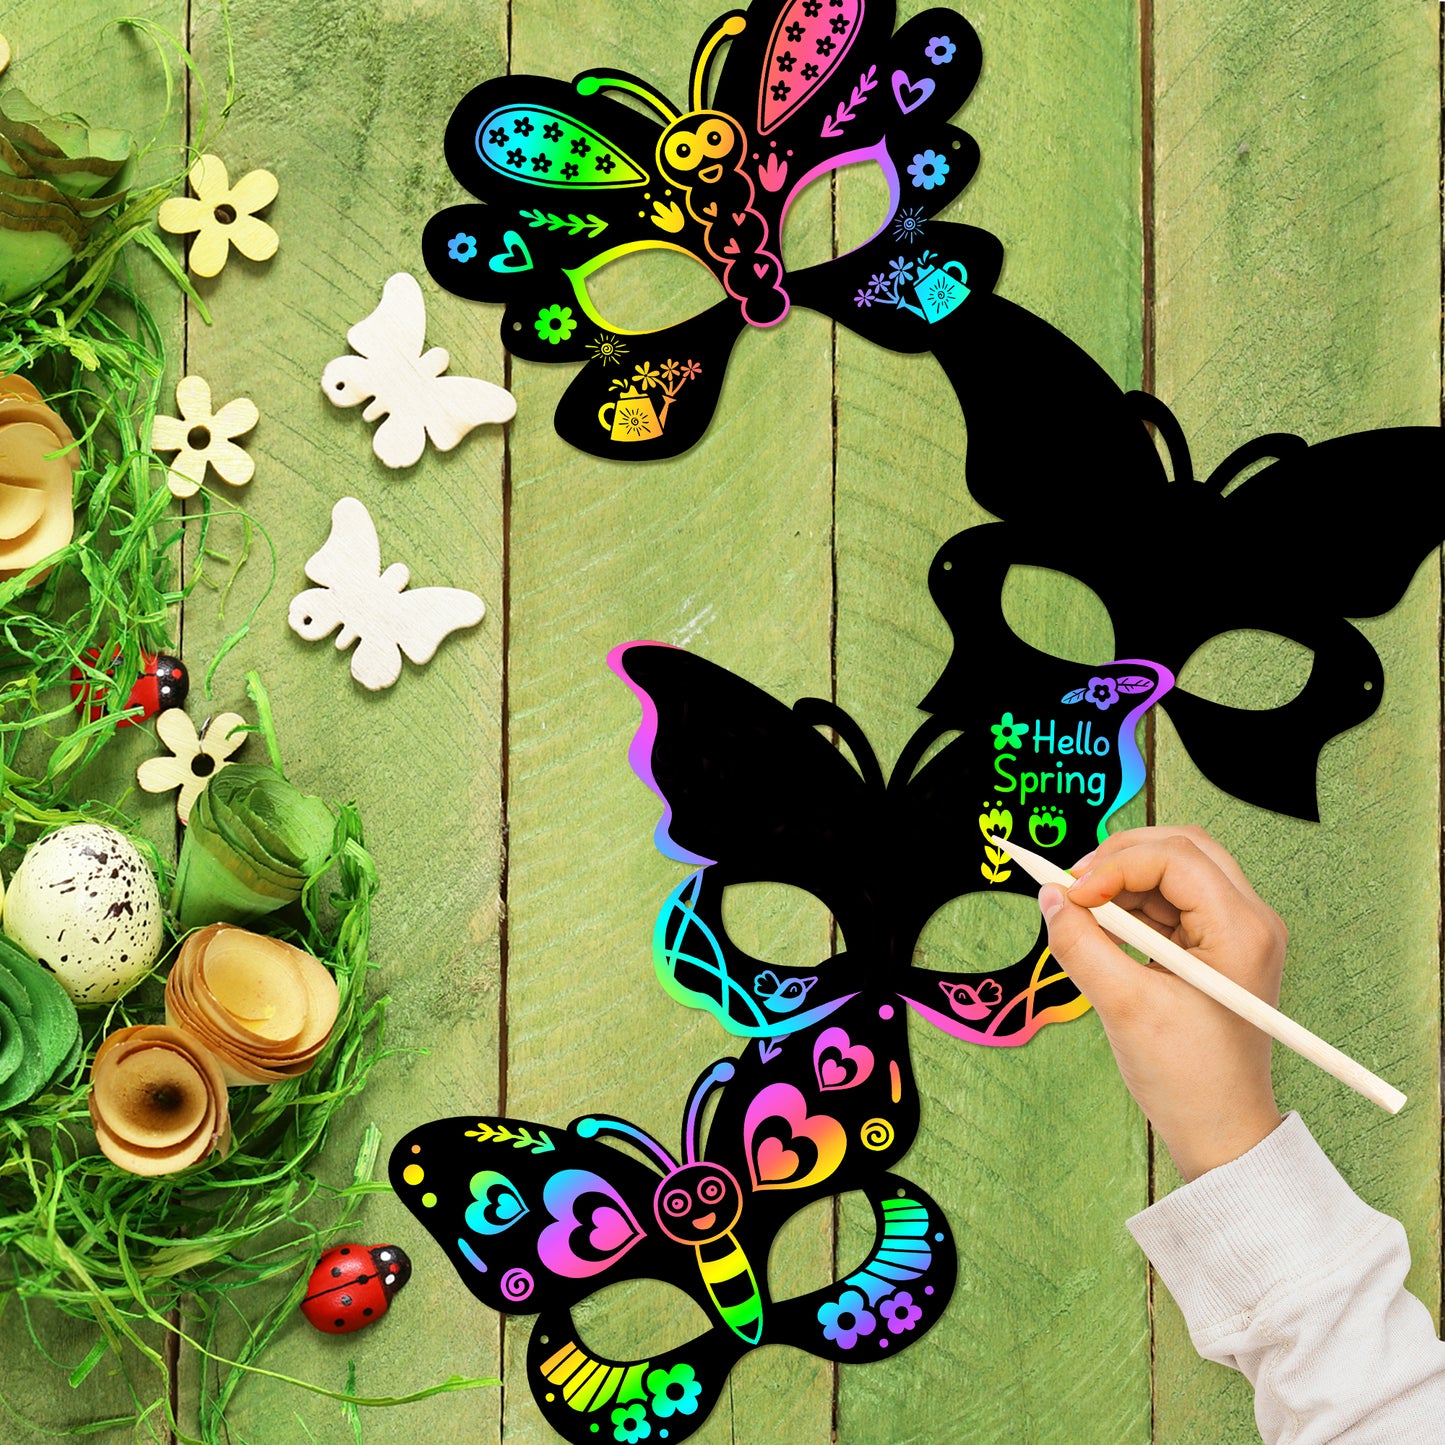 HubirdSall 24Pcs Spring Butterfly Scratch Masks for Kids DIY Butterfly Rainbow Scratch Craft Kit Dress-up Costume Decorate for Girls Birthday Party Favors School Classroom Activity Art Project